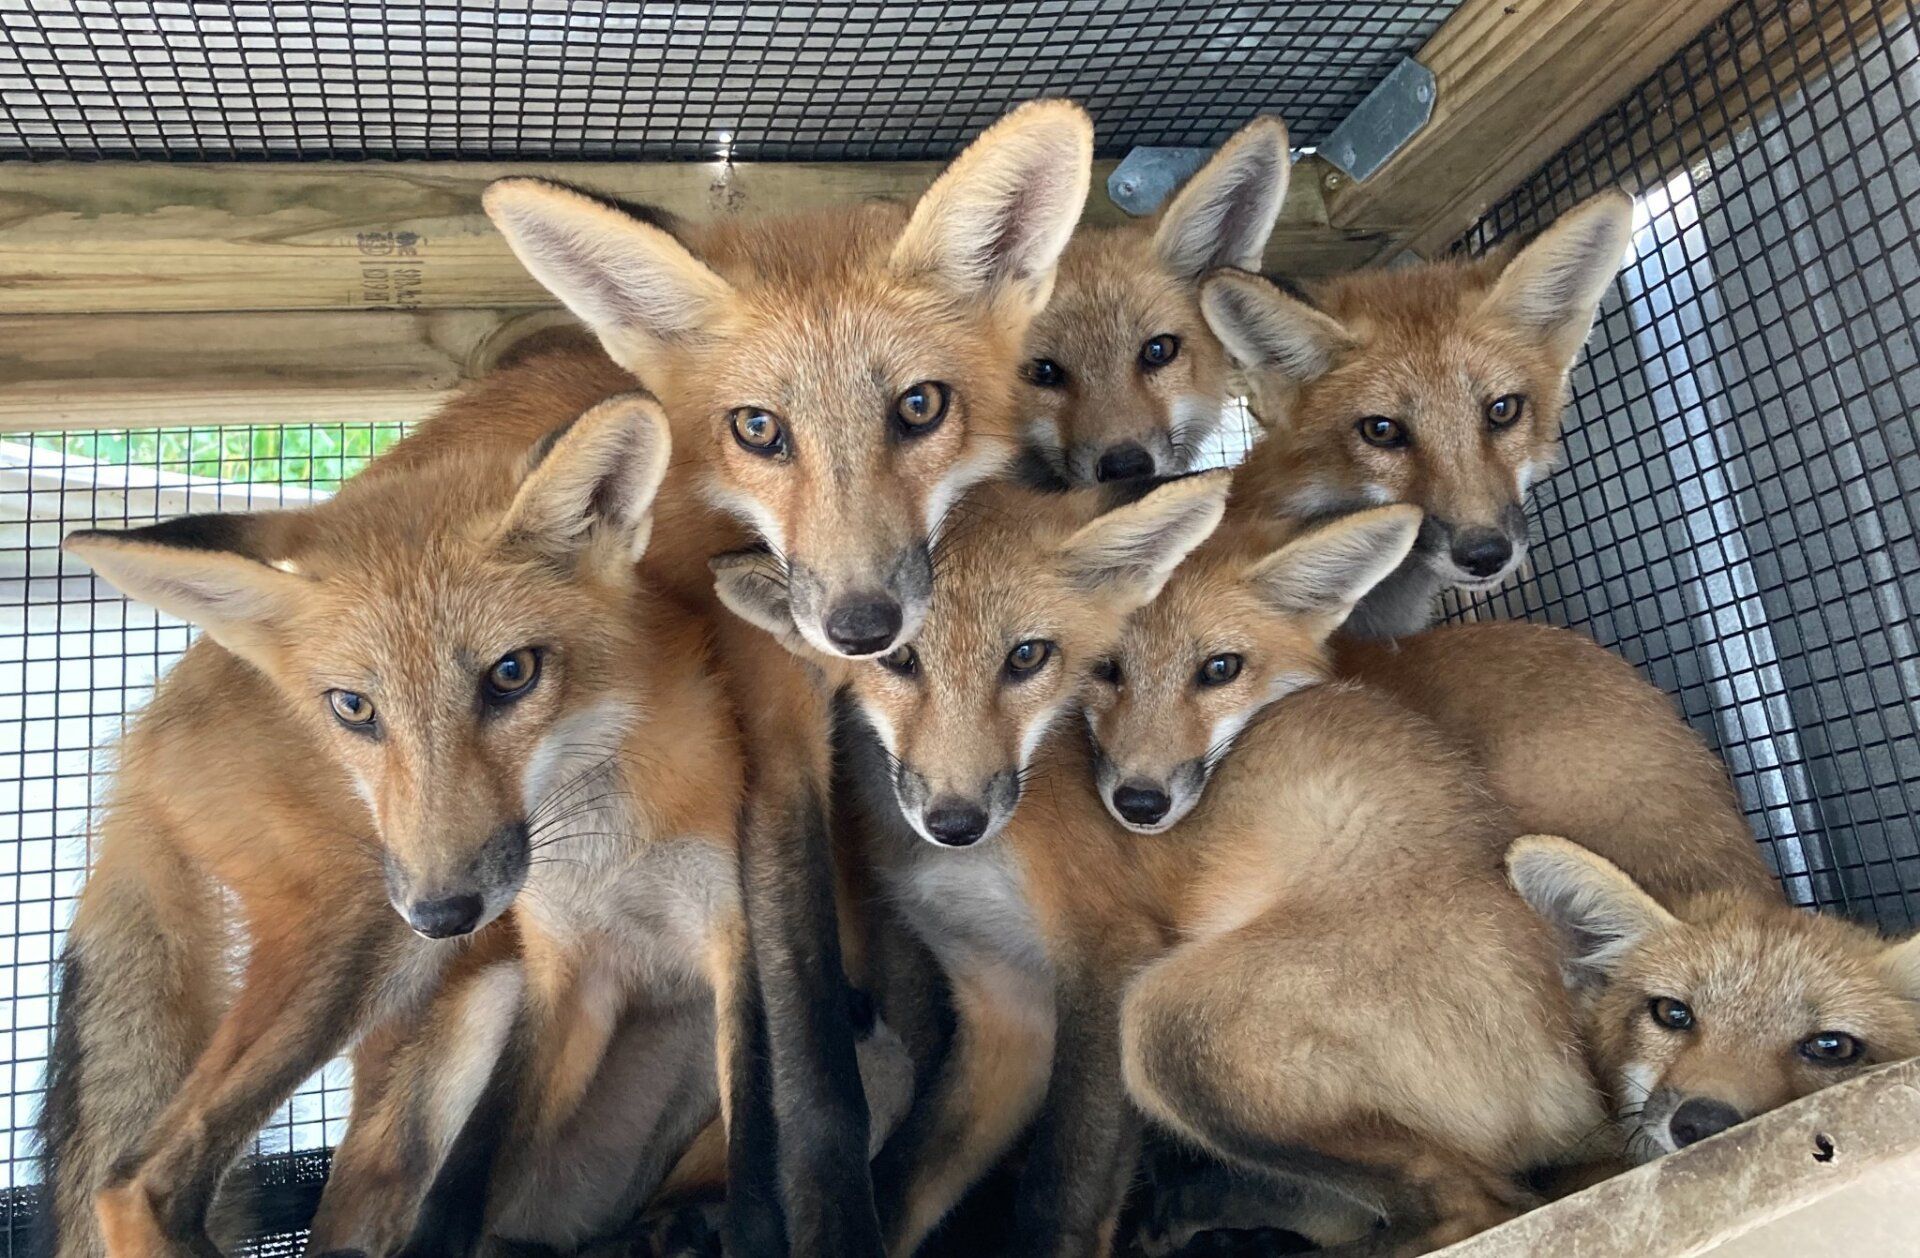  Orange Beach to apply for more Restore funds for wildlife center 